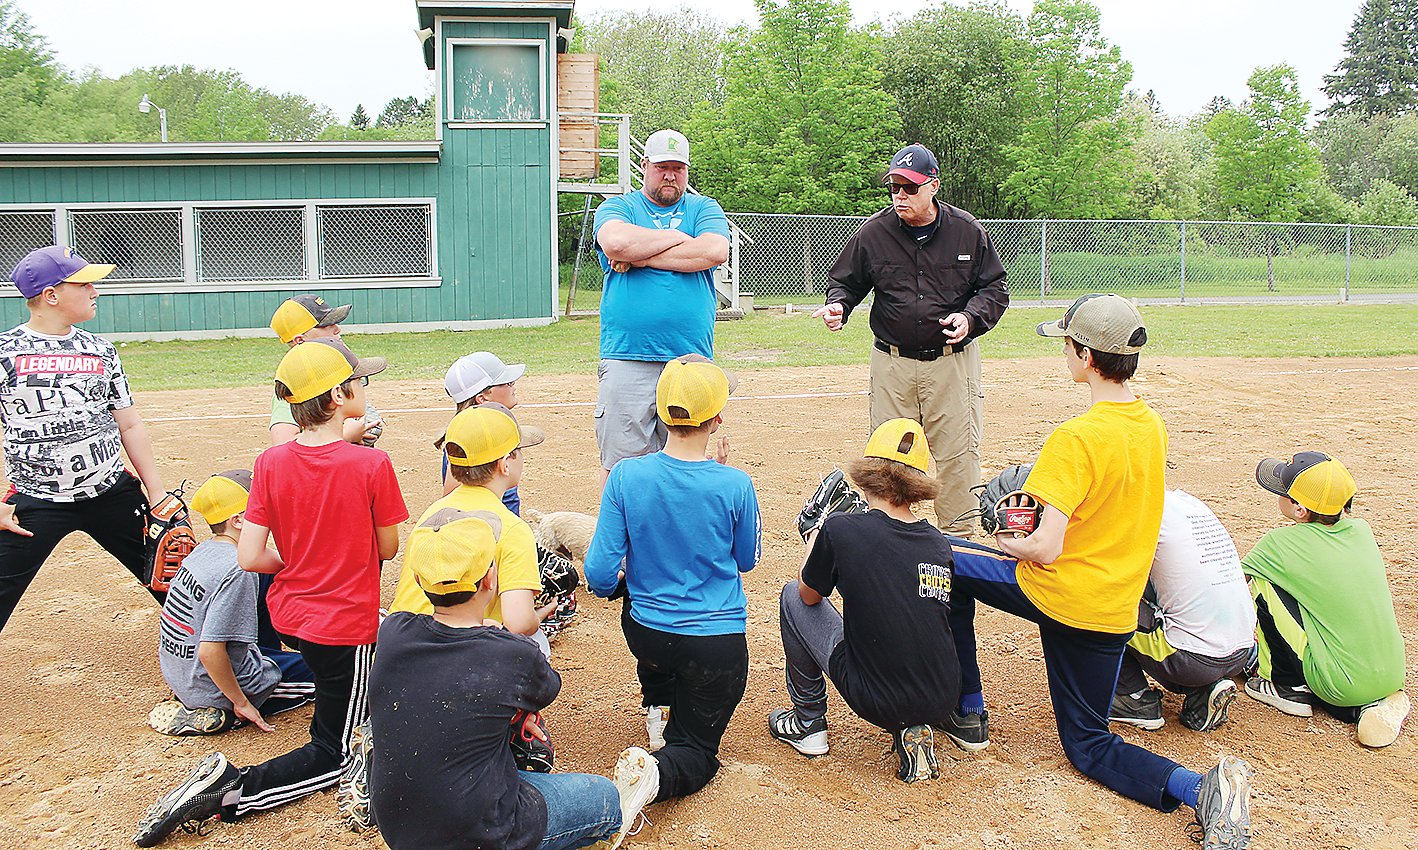 Jack Roddy talks to members of the Tower-Soudan Little League about baseball and what a talent scout might look for in a promising player.